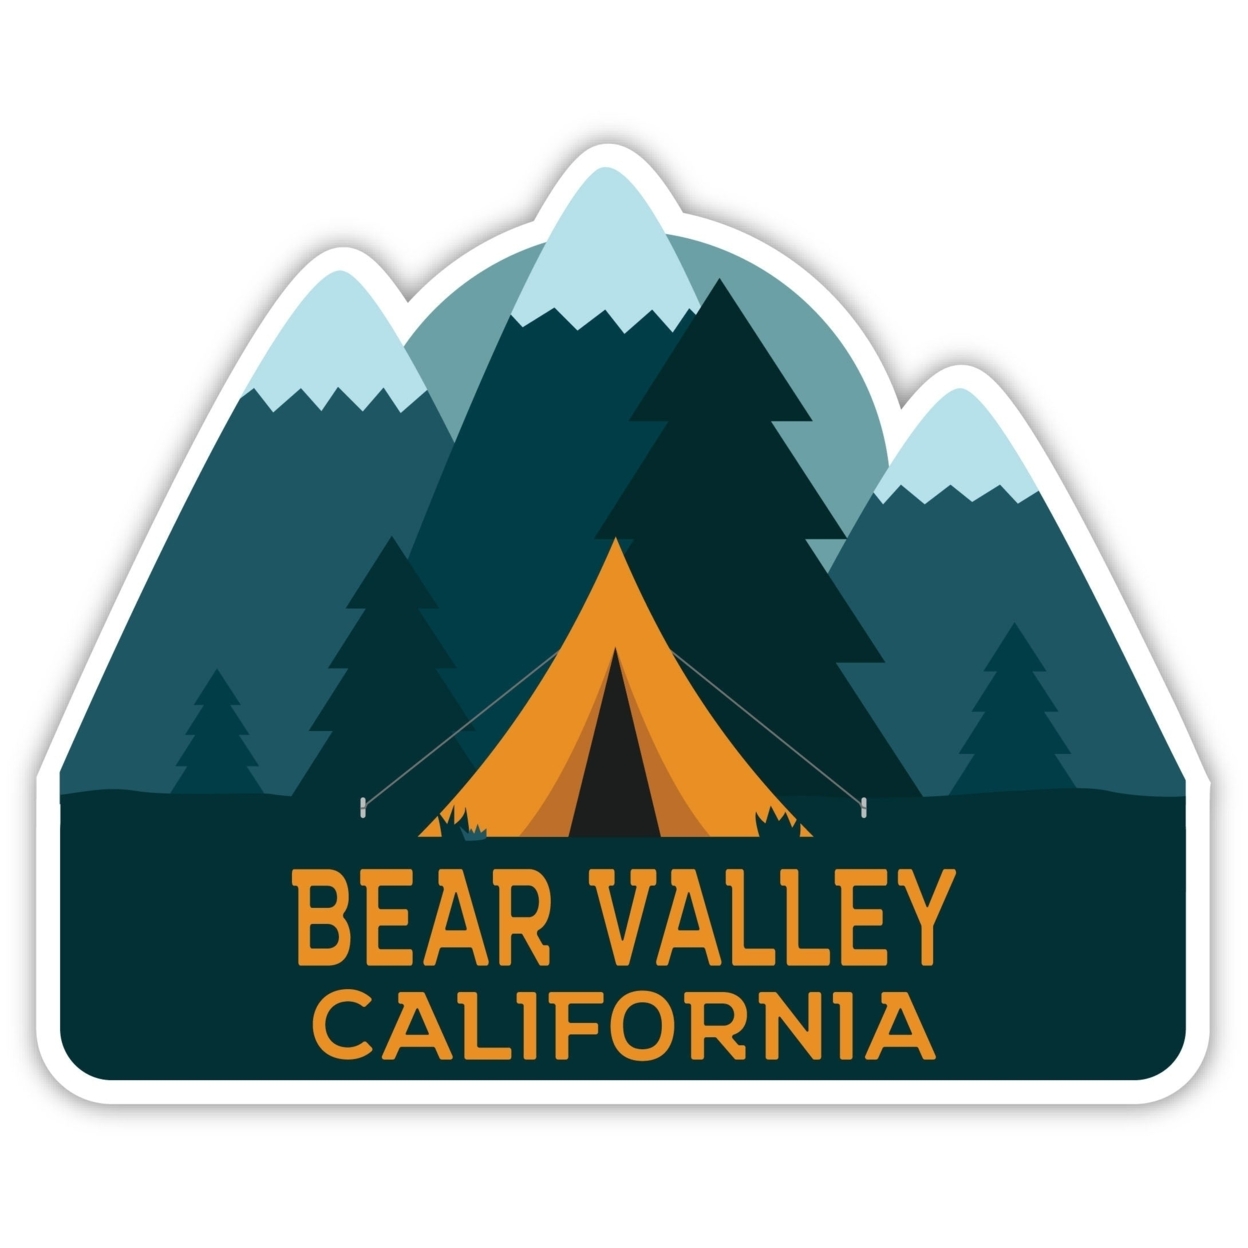 Bear Valley California Souvenir Decorative Stickers (Choose Theme And Size) - Single Unit, 10-Inch, Tent